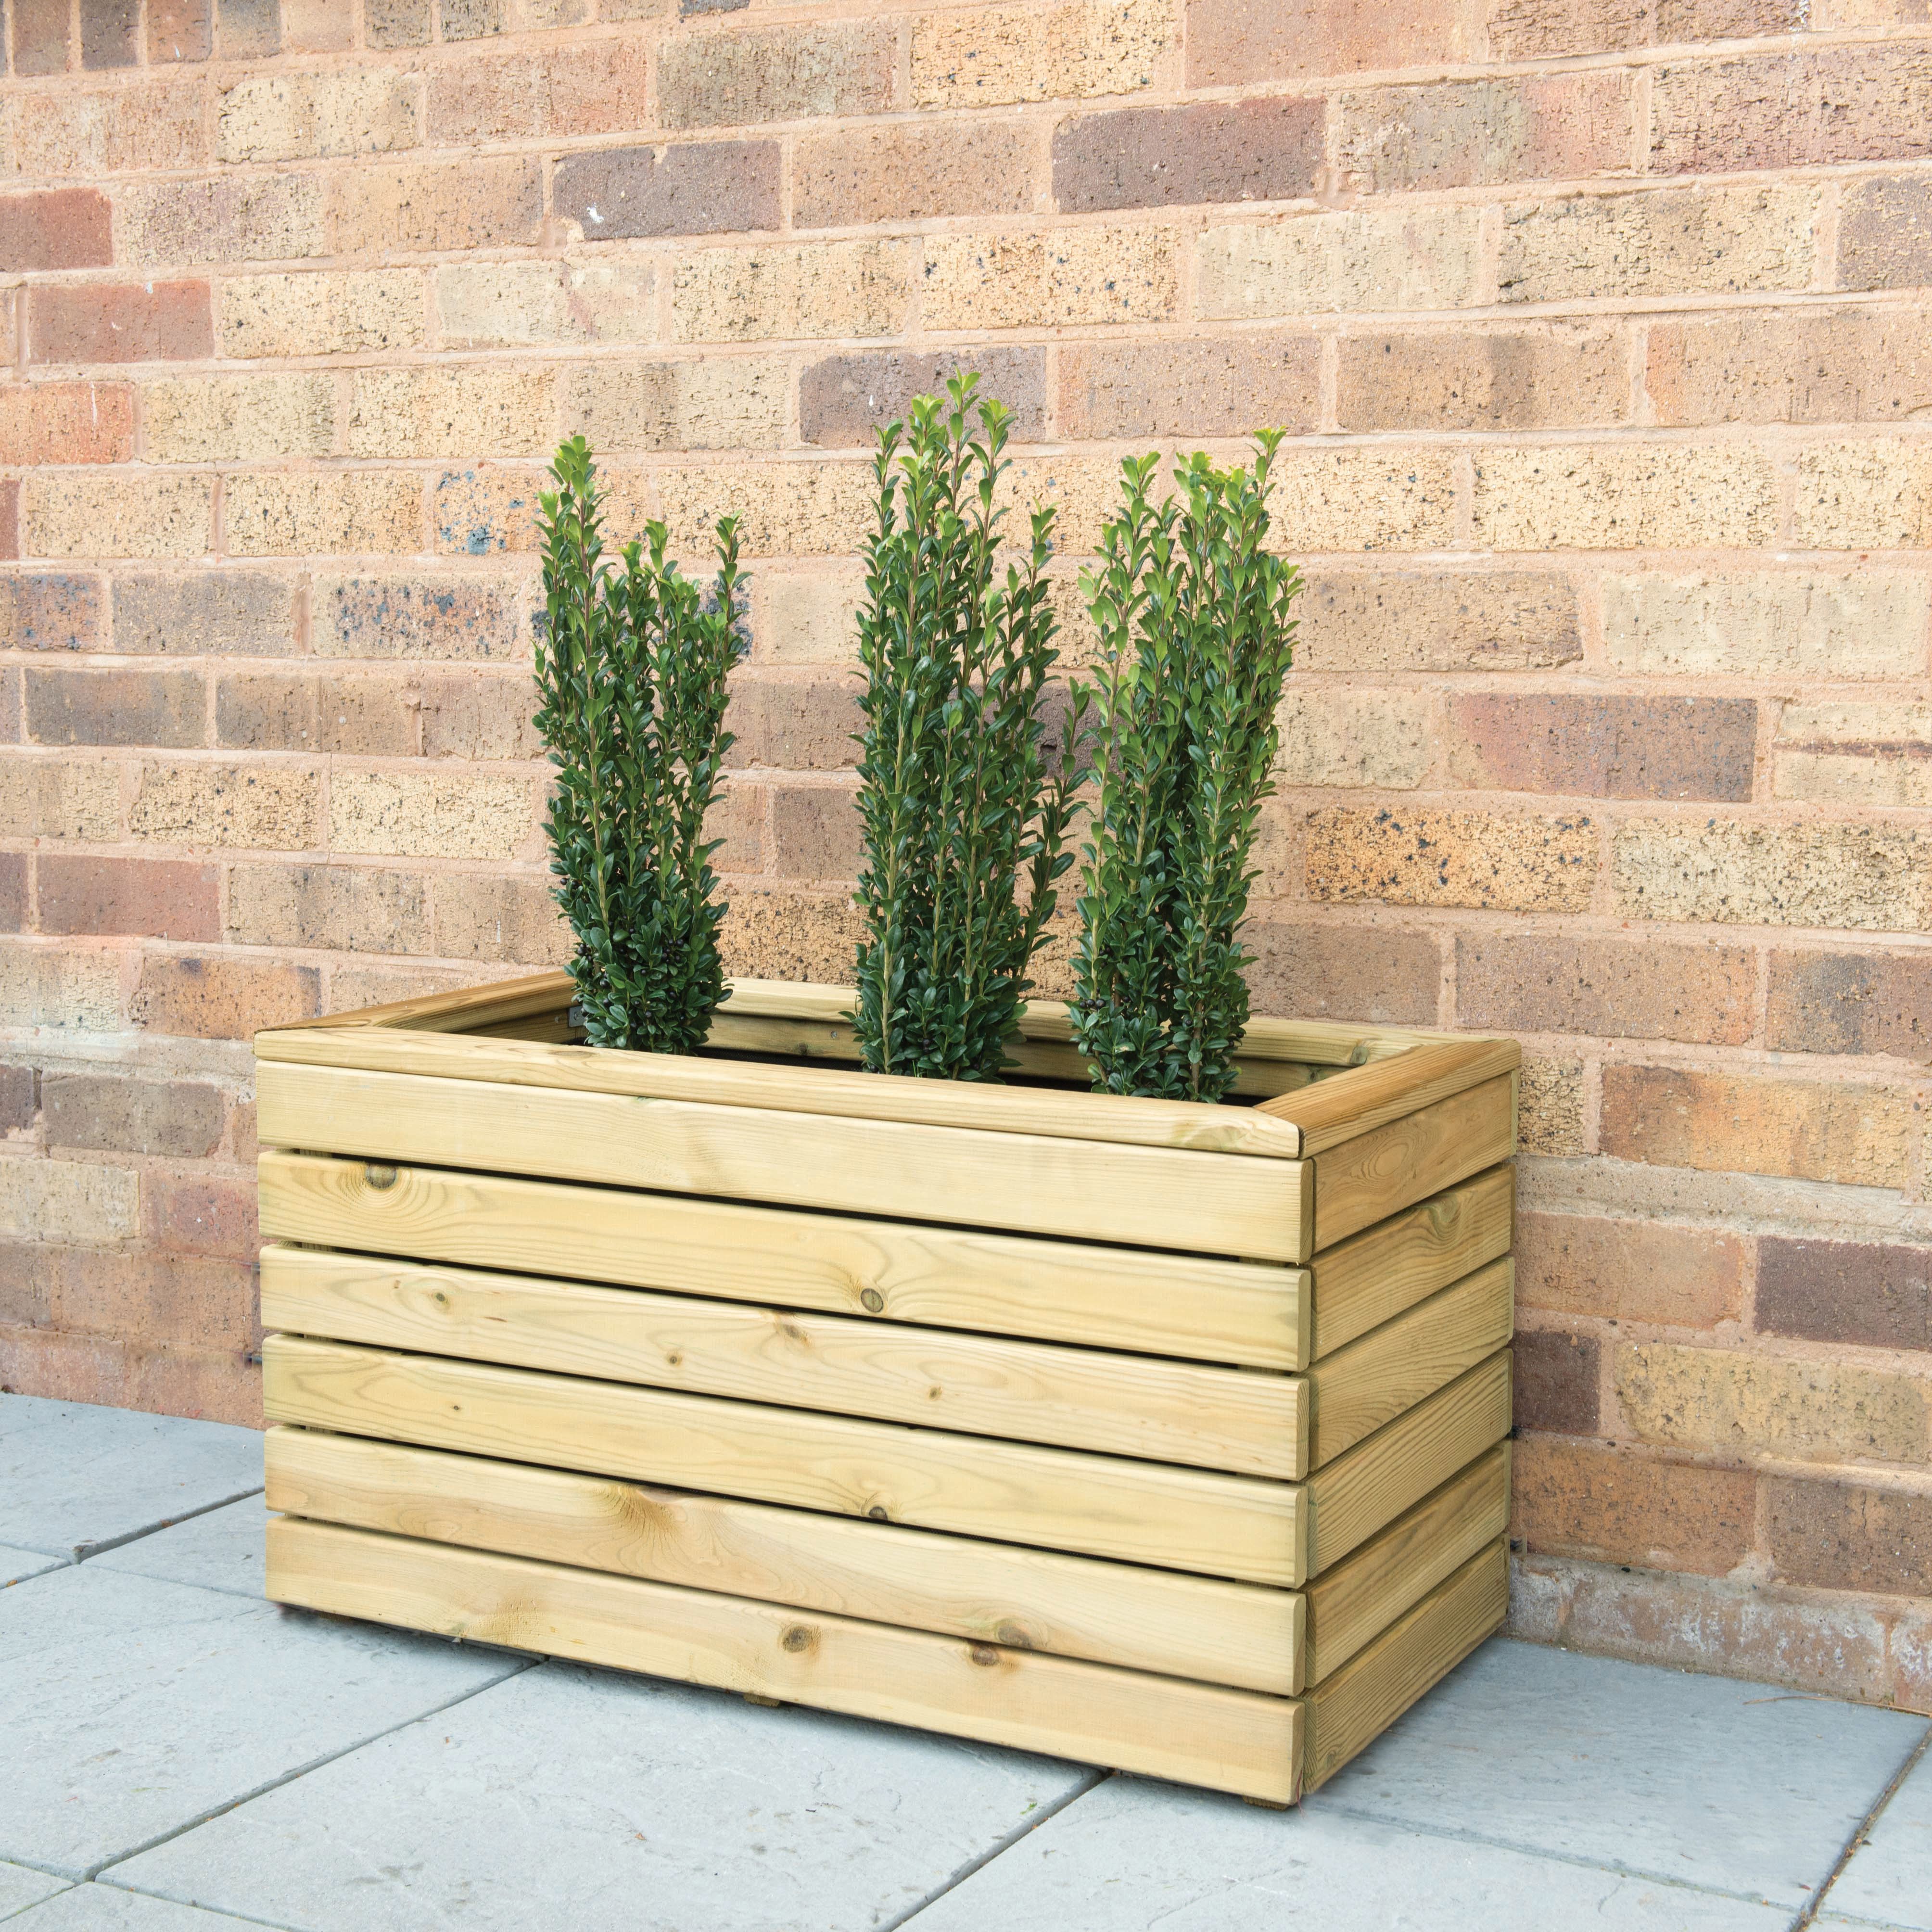 Image of Forest Garden Linear Double Planter - 800 x 400mm